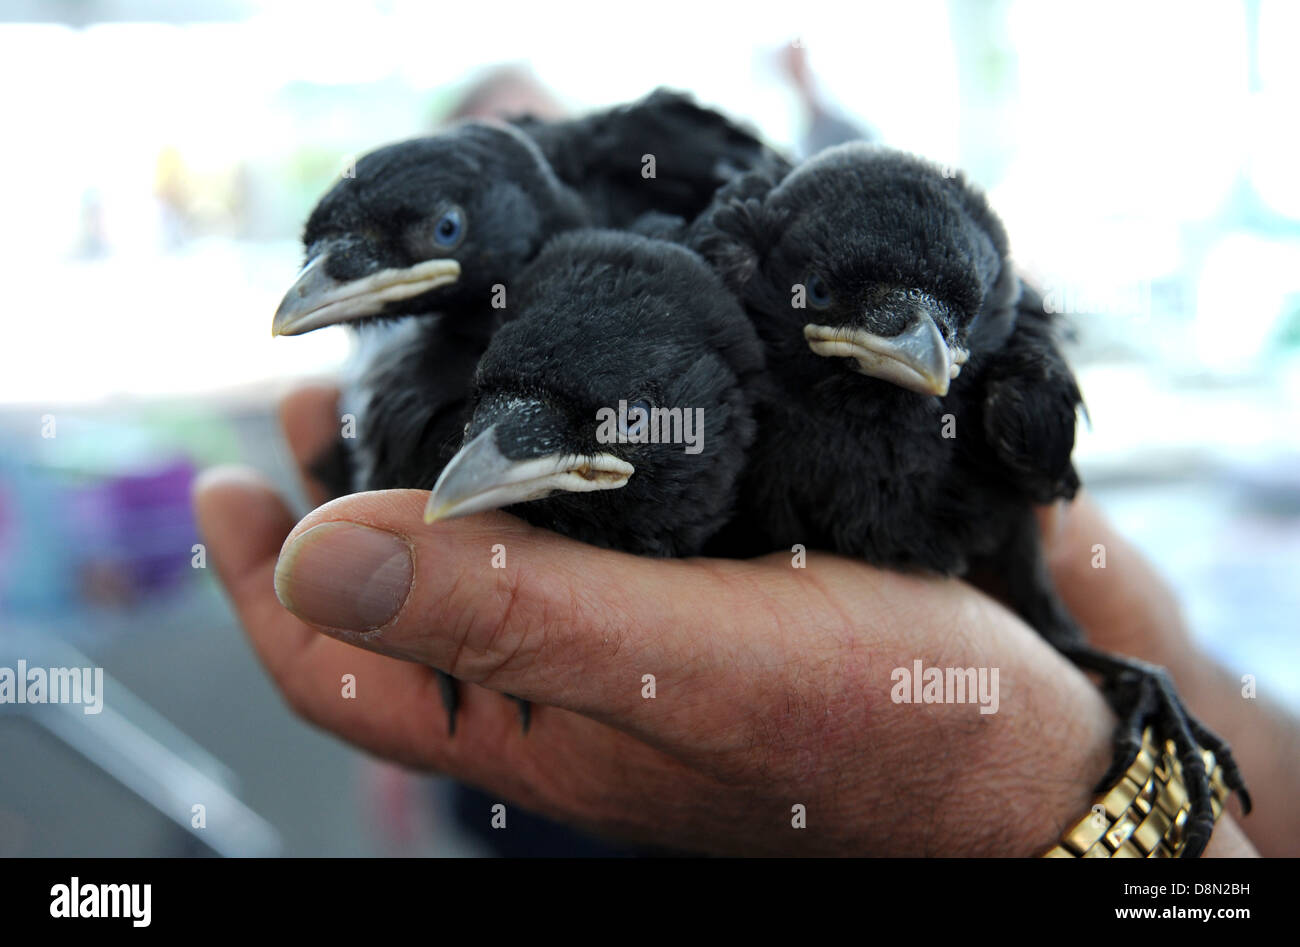 Young Jackdaw chicks in a hand scientific name Corvus monedula Stock Photo